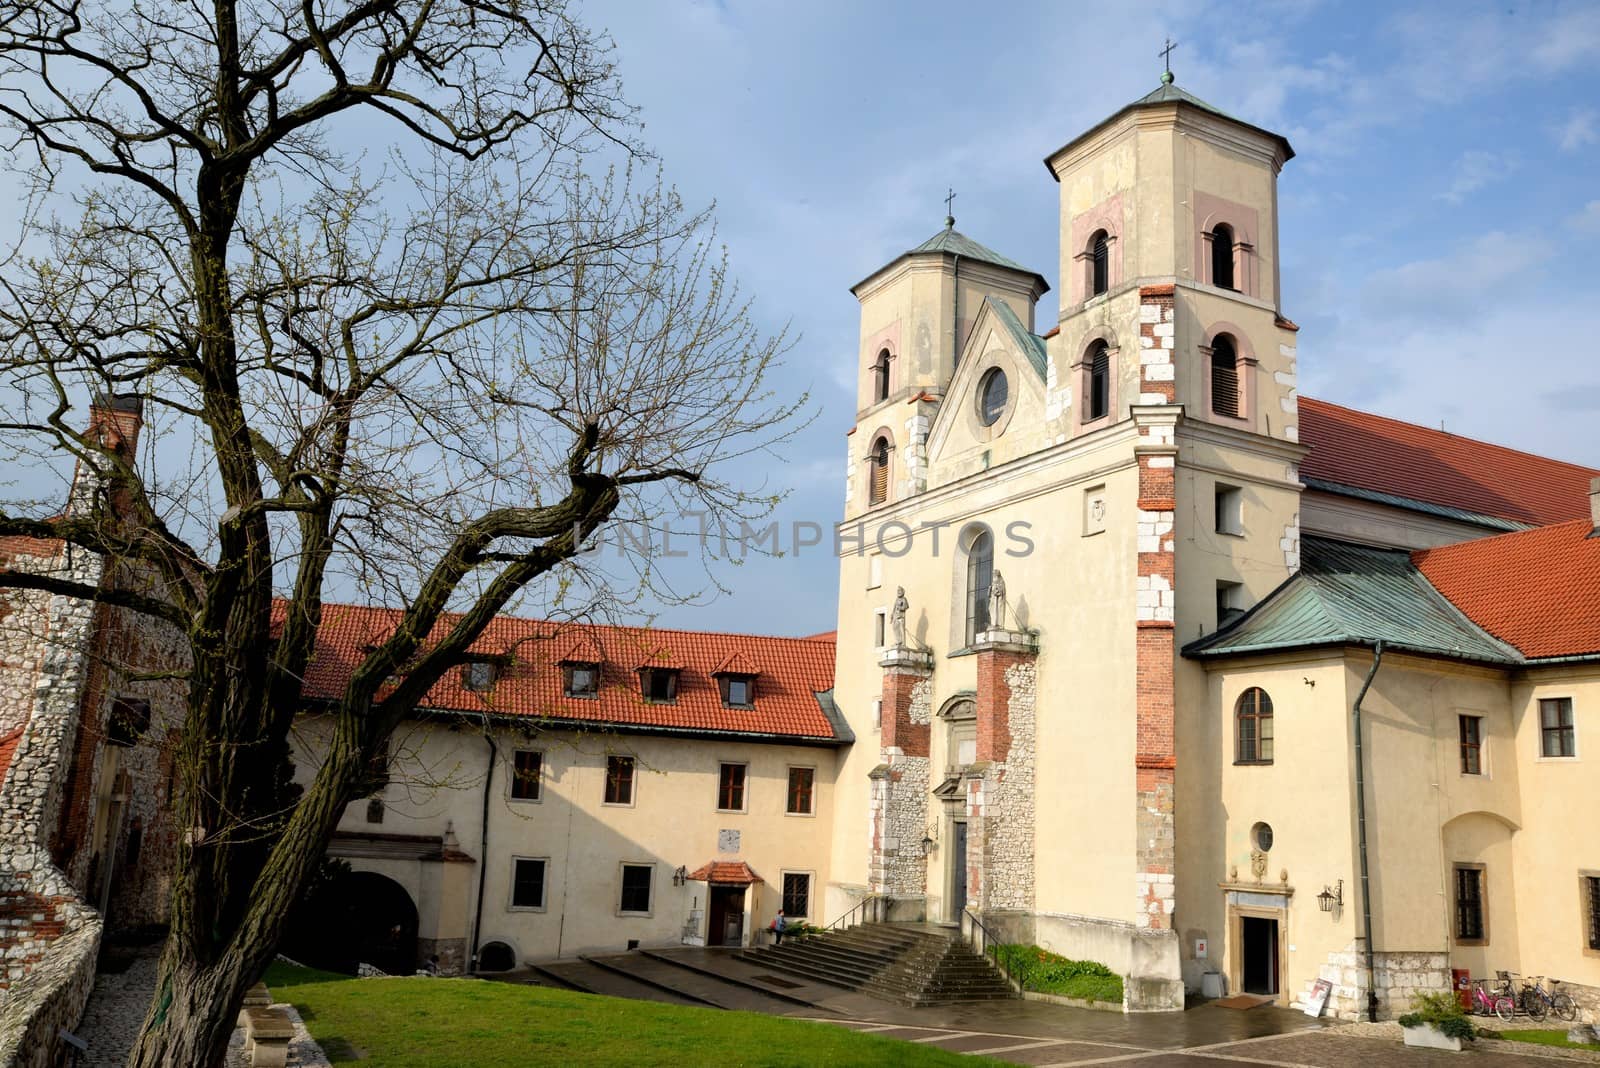 View from the courtyard to the Benedictine monastery in Tyniec